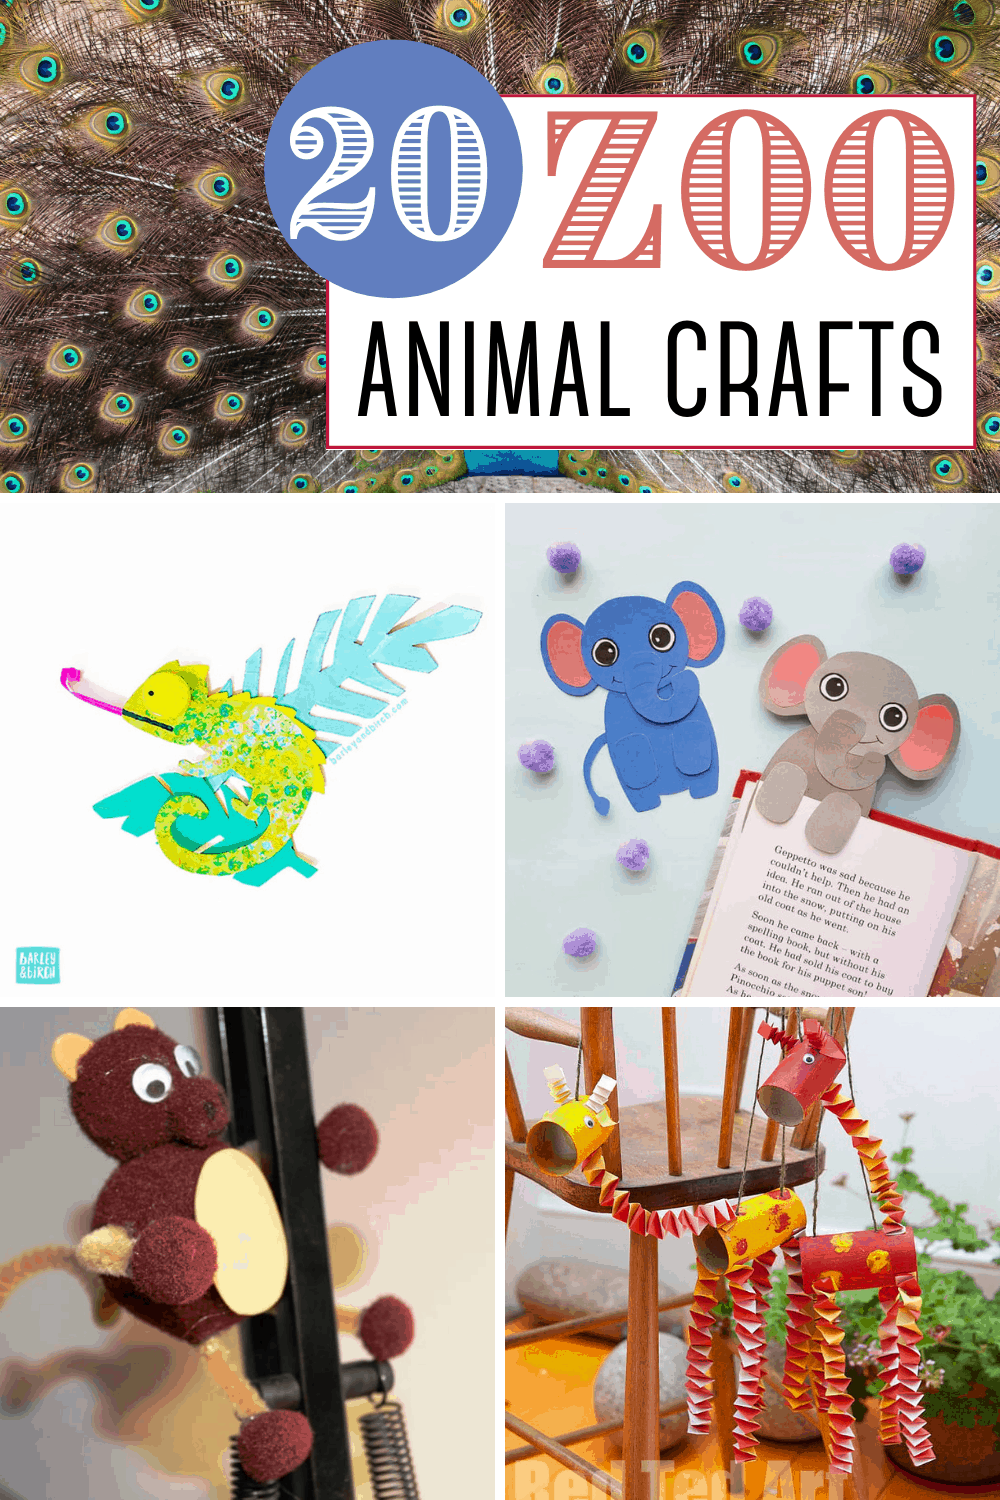 20 Adorable Zoo Animal Crafts for Preschoolers to Make